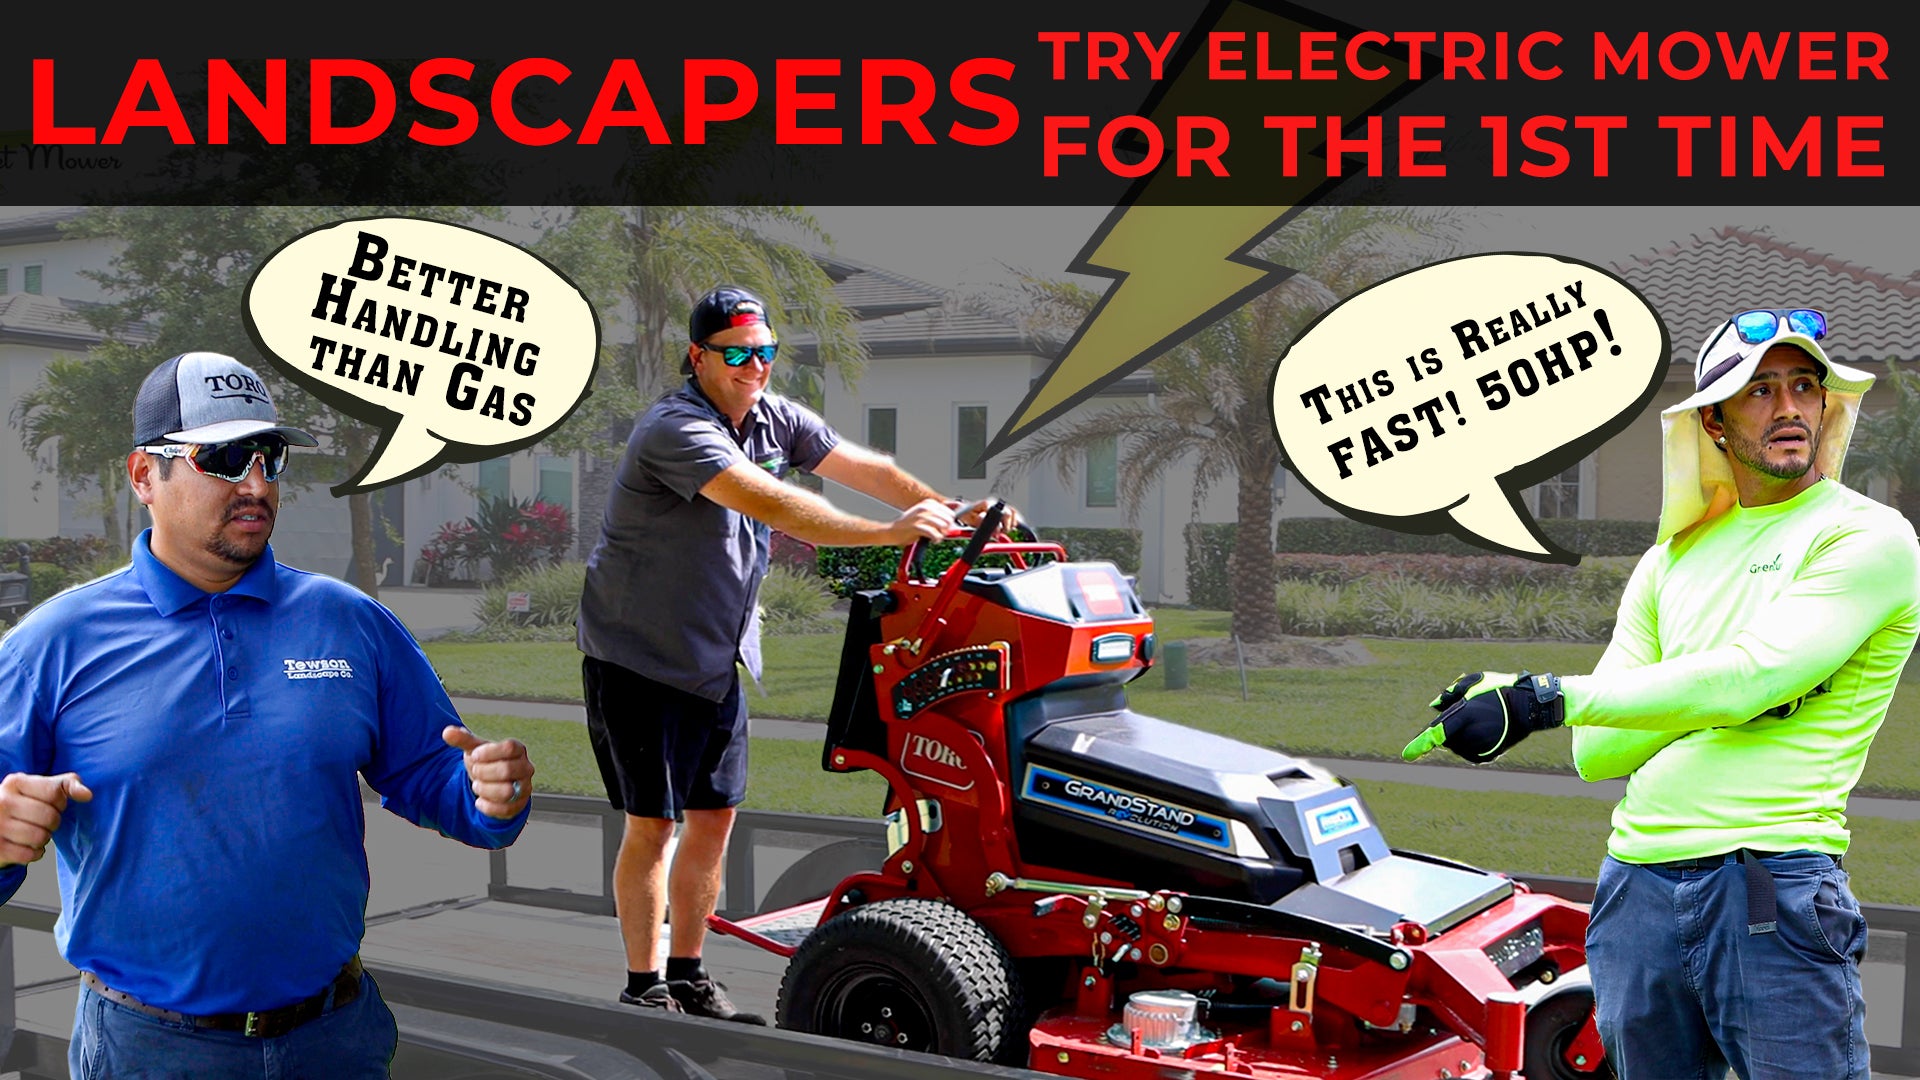 Real People try Electric Mower